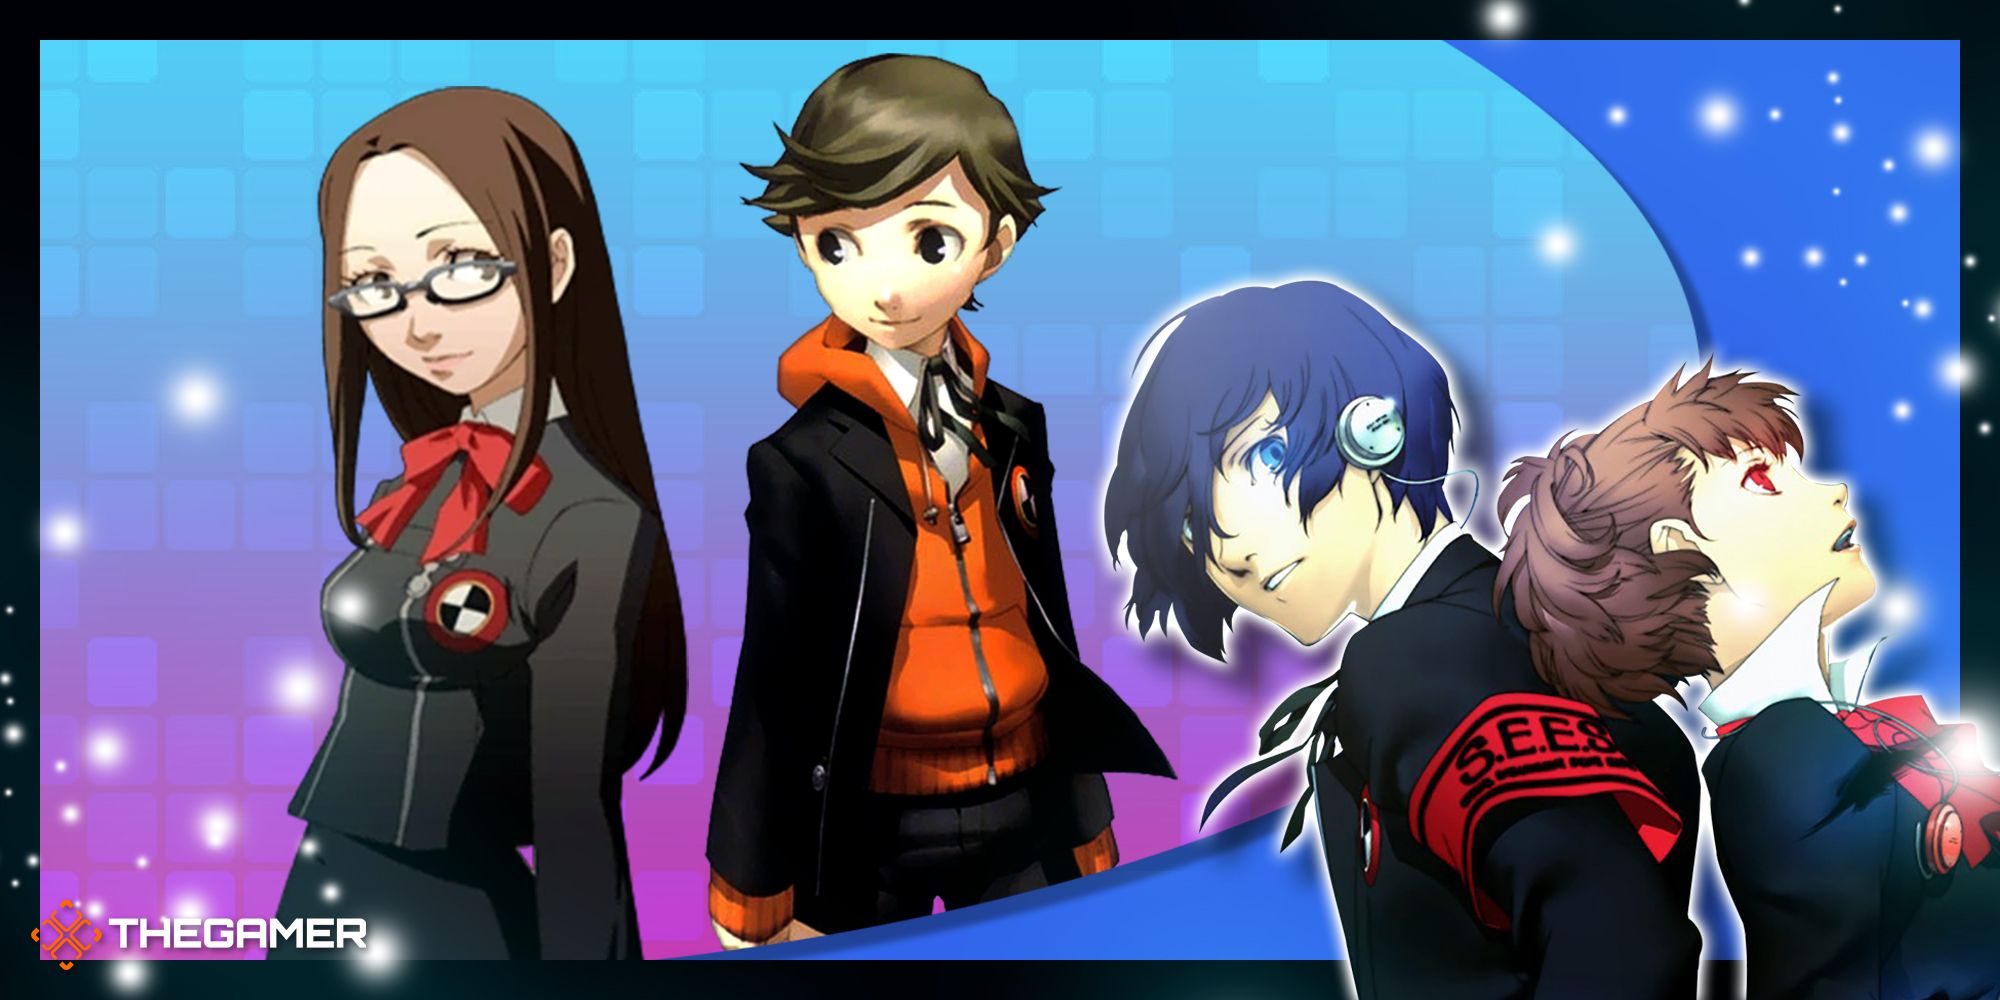 How To Rank Up The Justice Social Link In Persona 3 Portable